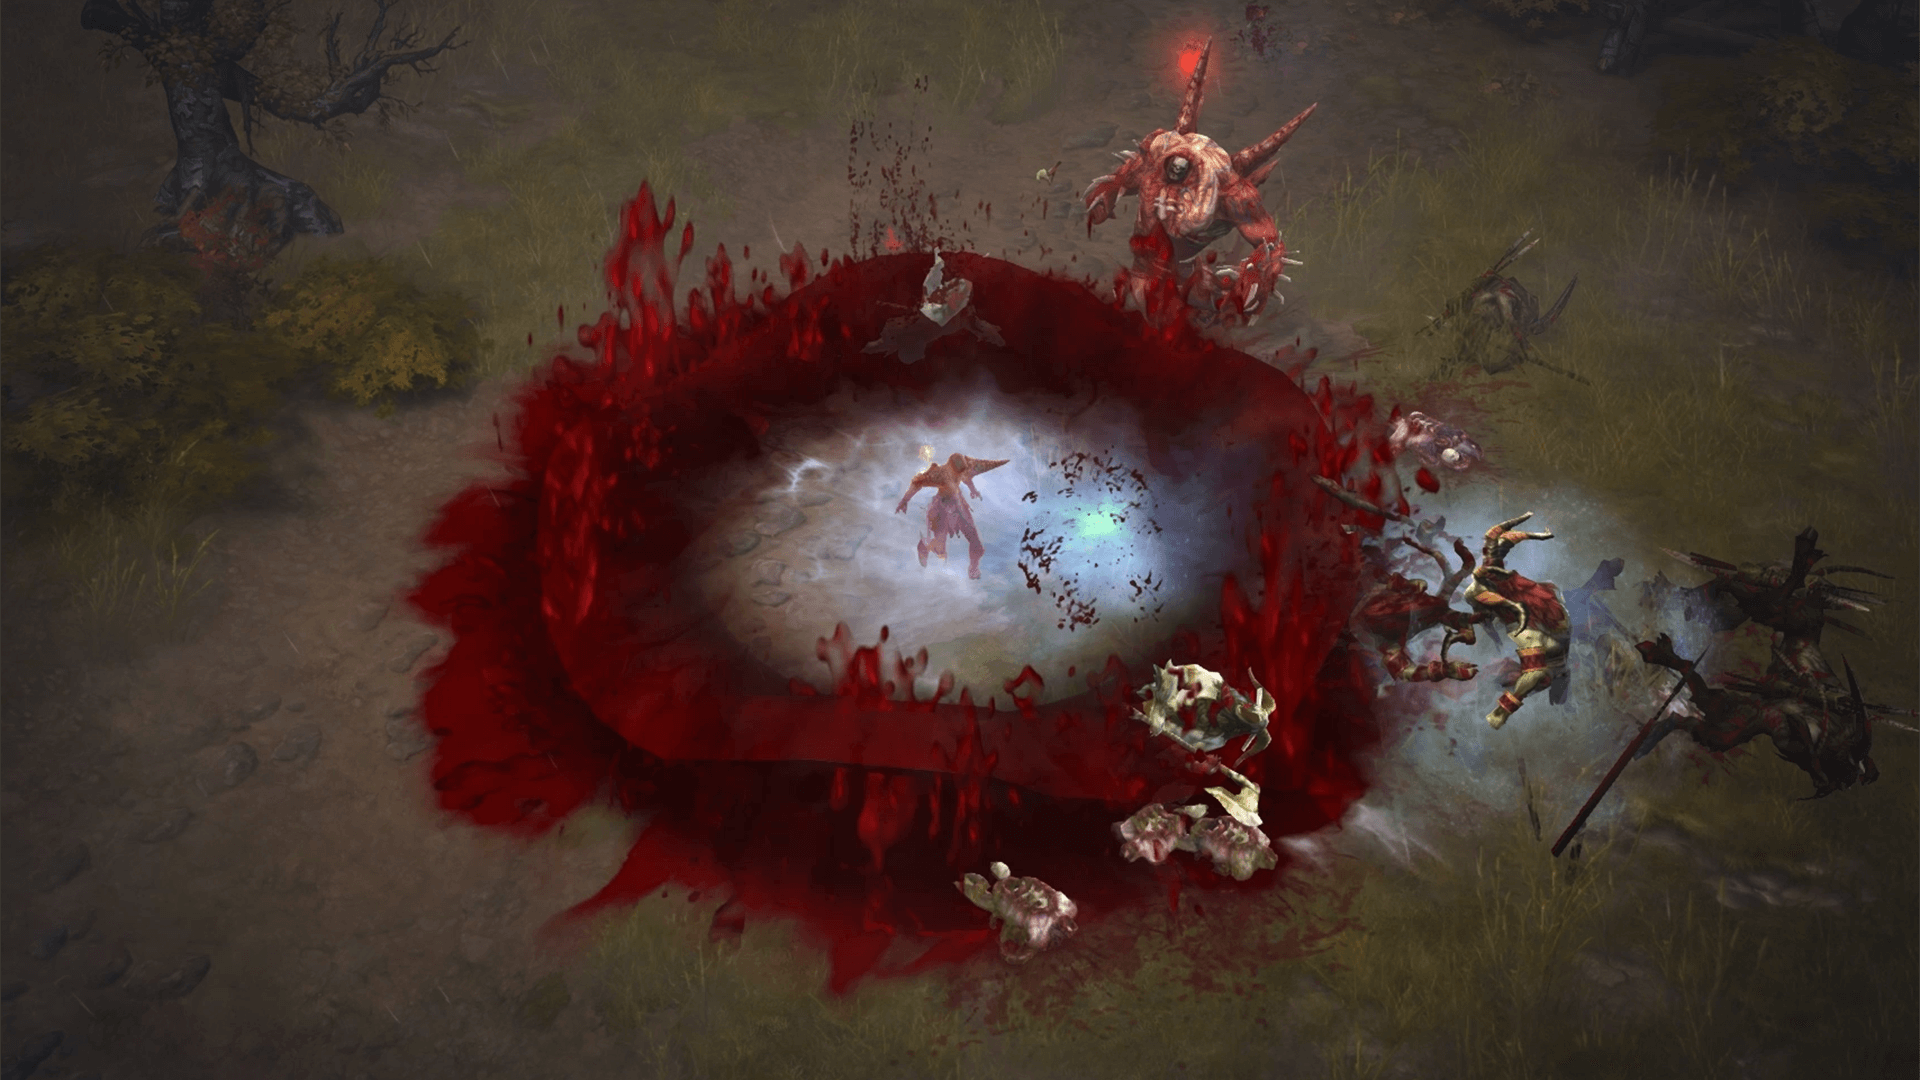 So much blood, courtesy of the Diablo III's Necromancer.